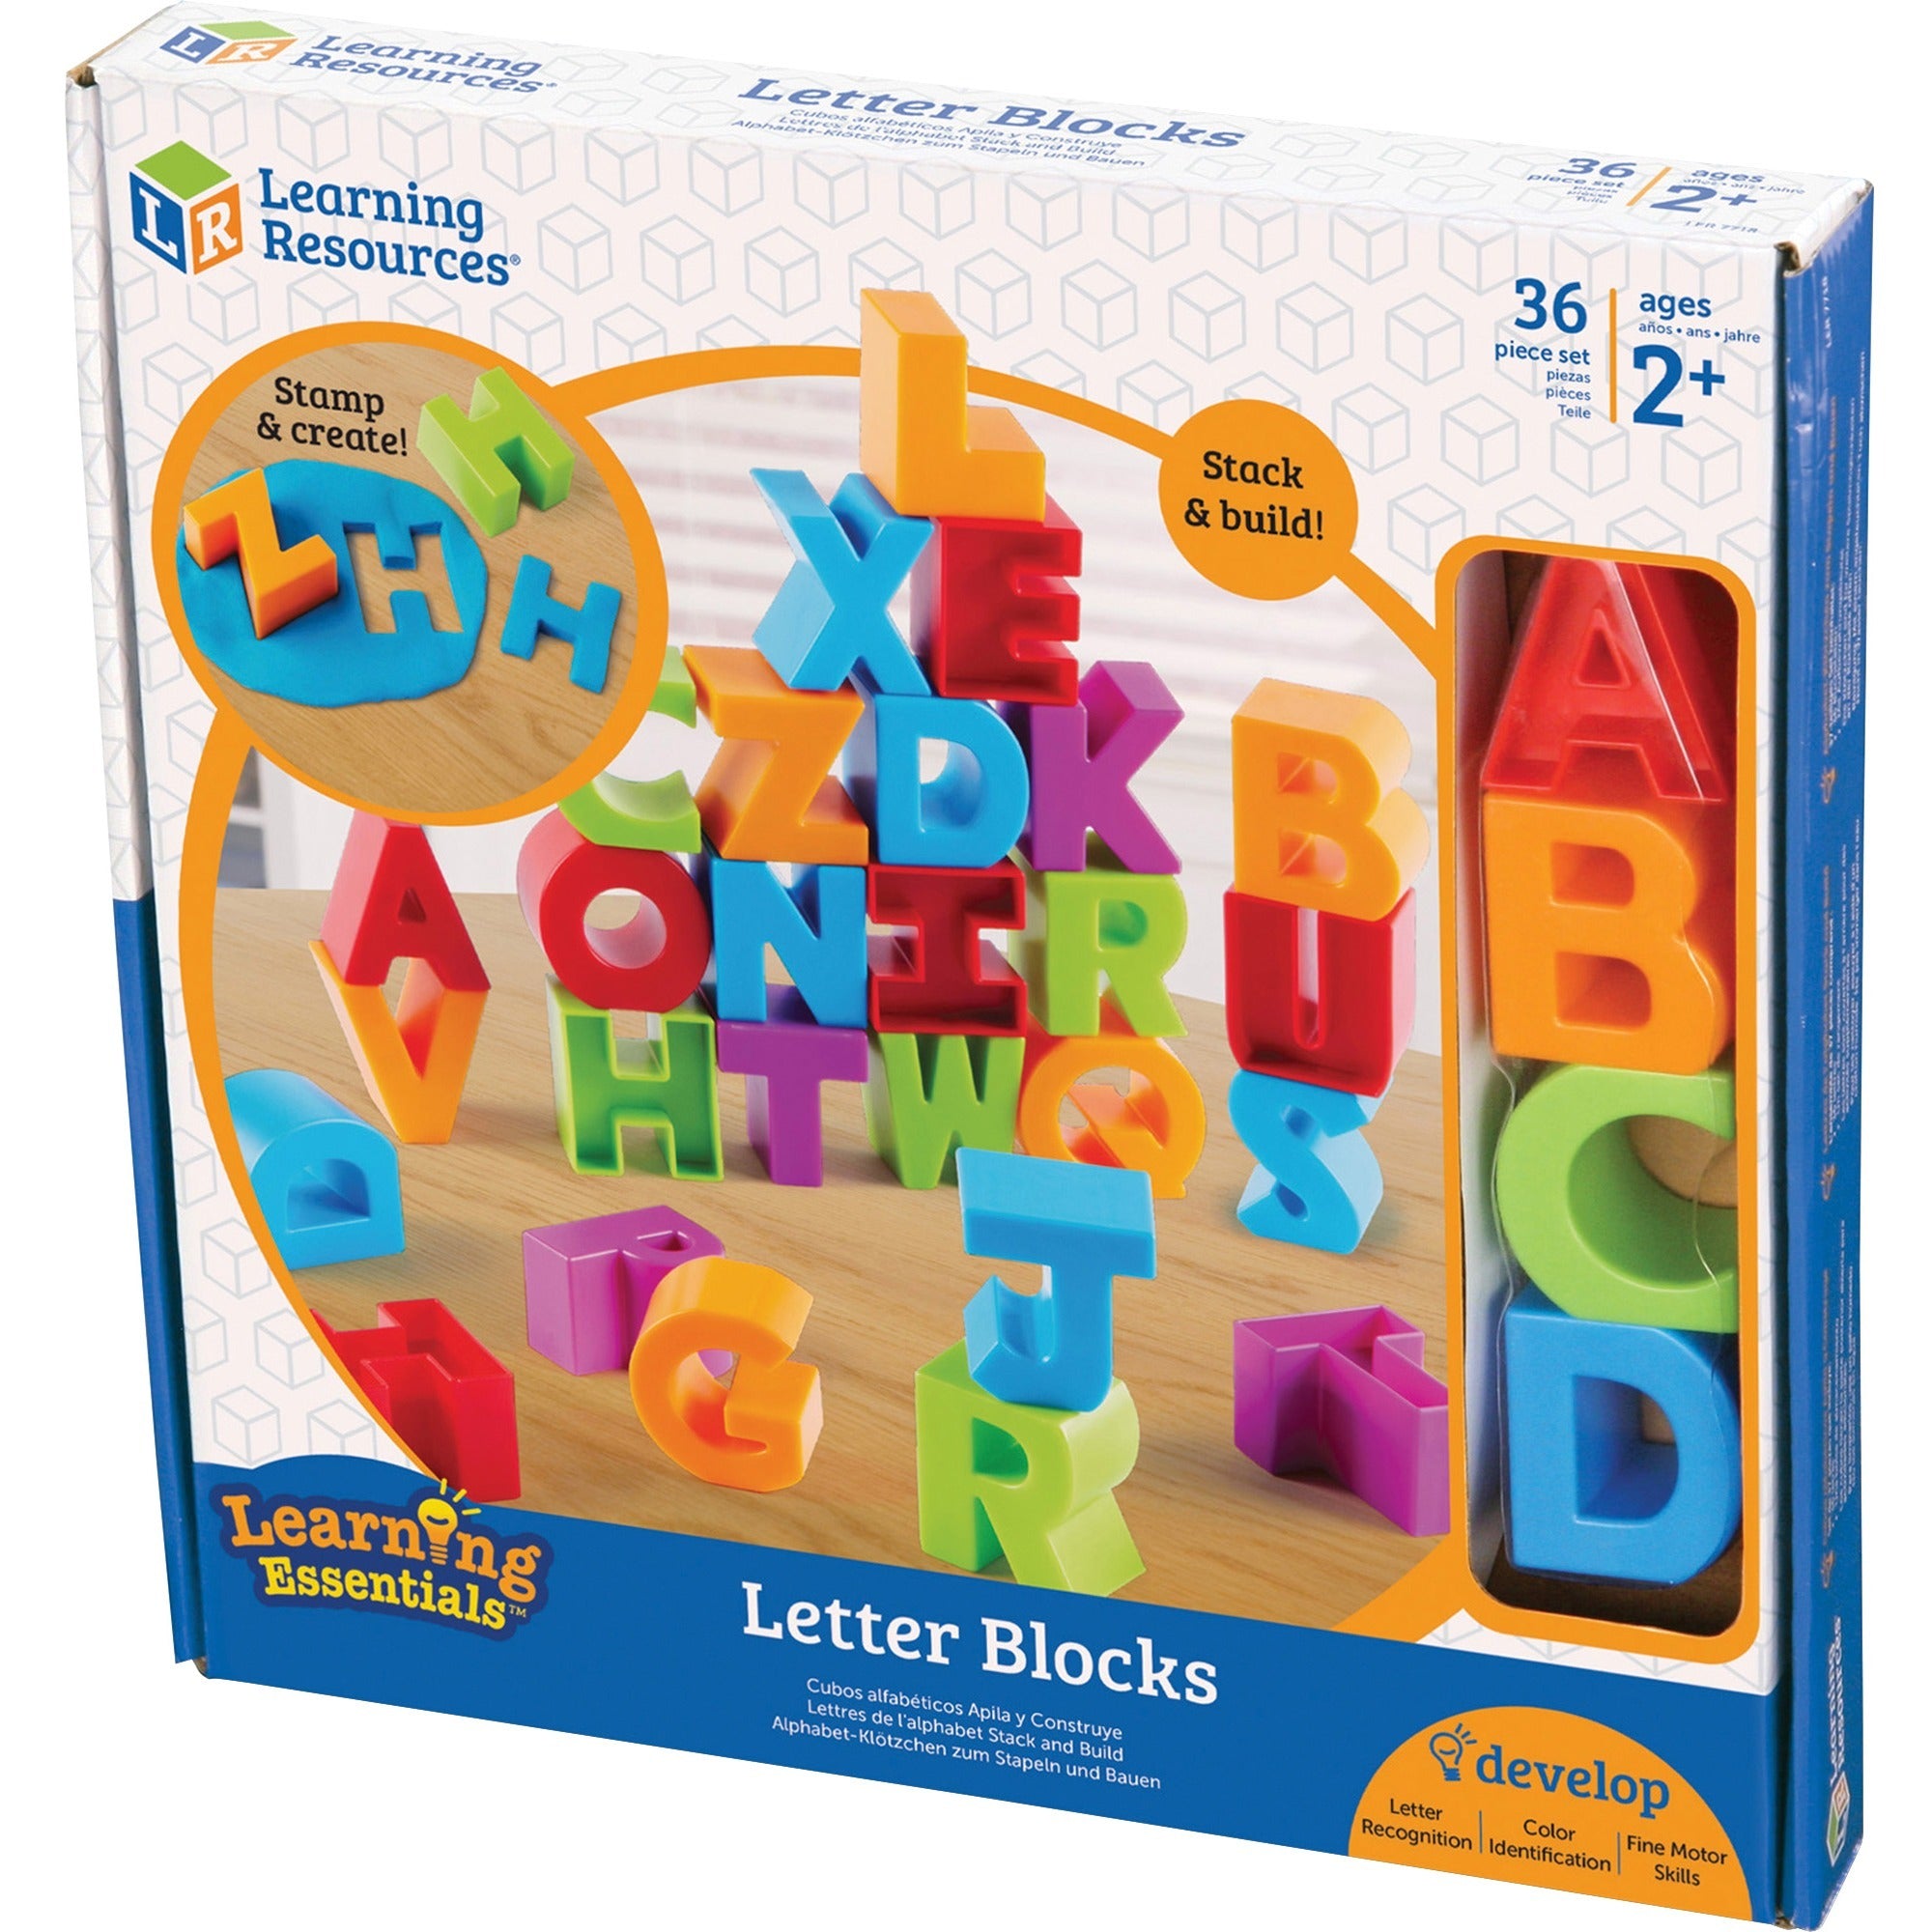 learning-resources-letter-blocks-theme-subject-learning-skill-learning-visual-letter-recognition-alphabetical-order-color-identification-word-building-fine-motor-eye-hand-coordination-tactile-discrimination-2-year-&-up-multi_lrnler7718 - 1